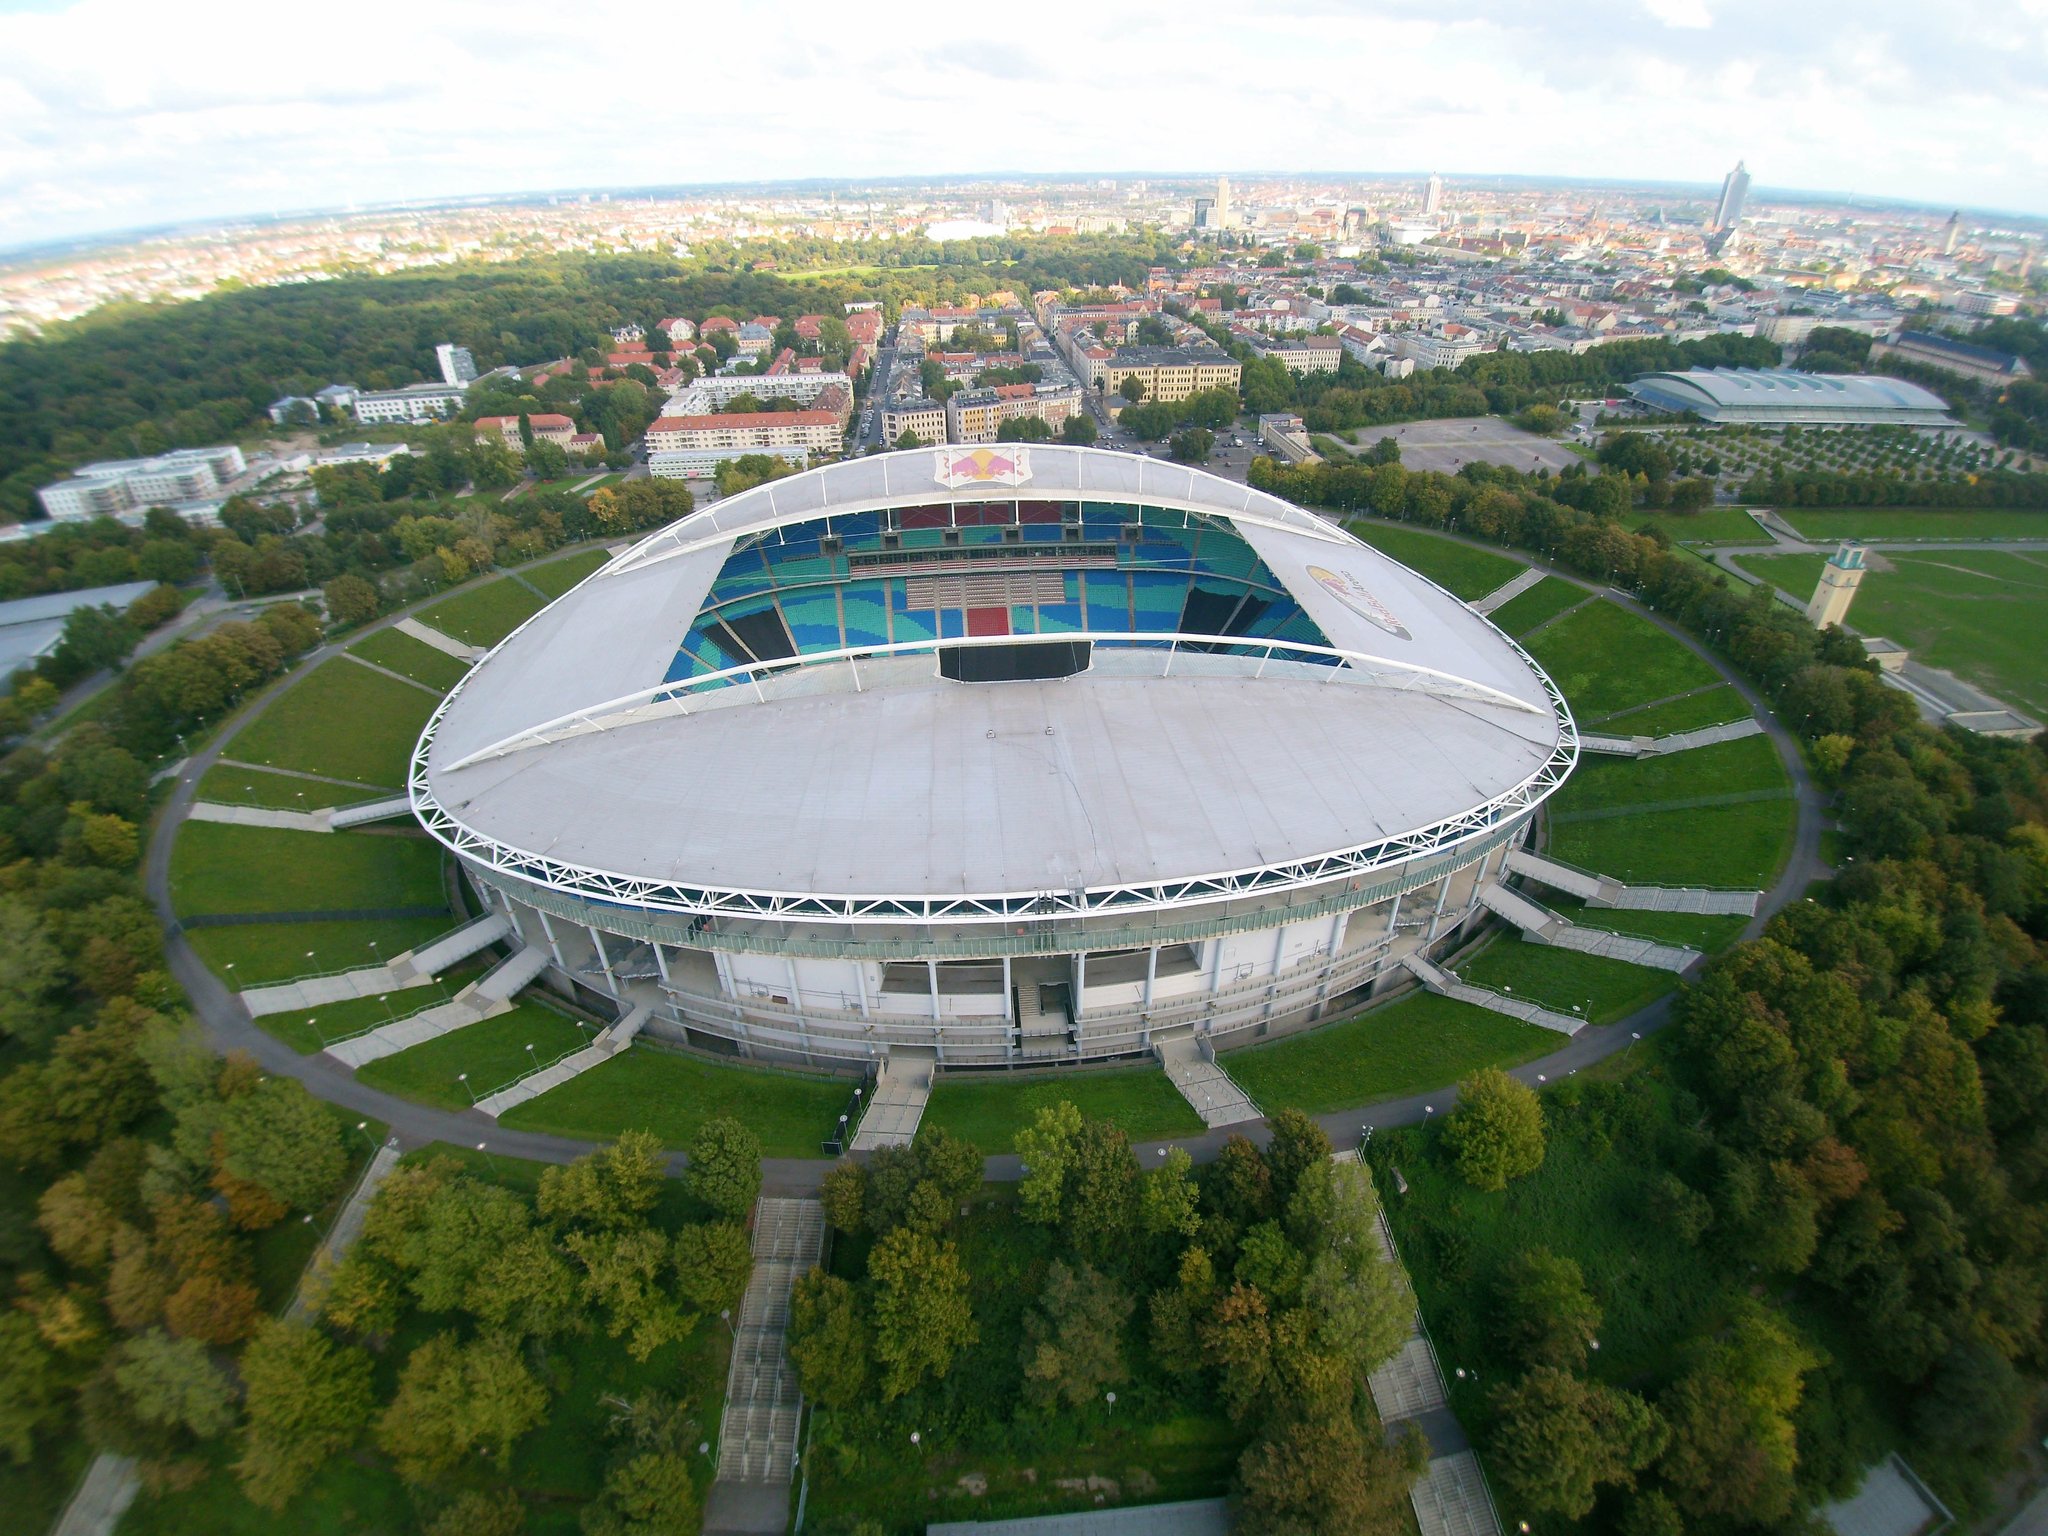 Rb Leipzig English Red Bull Have Reached A Deal In Principal To Purchase The Zentralstadion Its Main And Adjoining Buildings As Well As The Bell Tower T Co Fm634oqnof Twitter